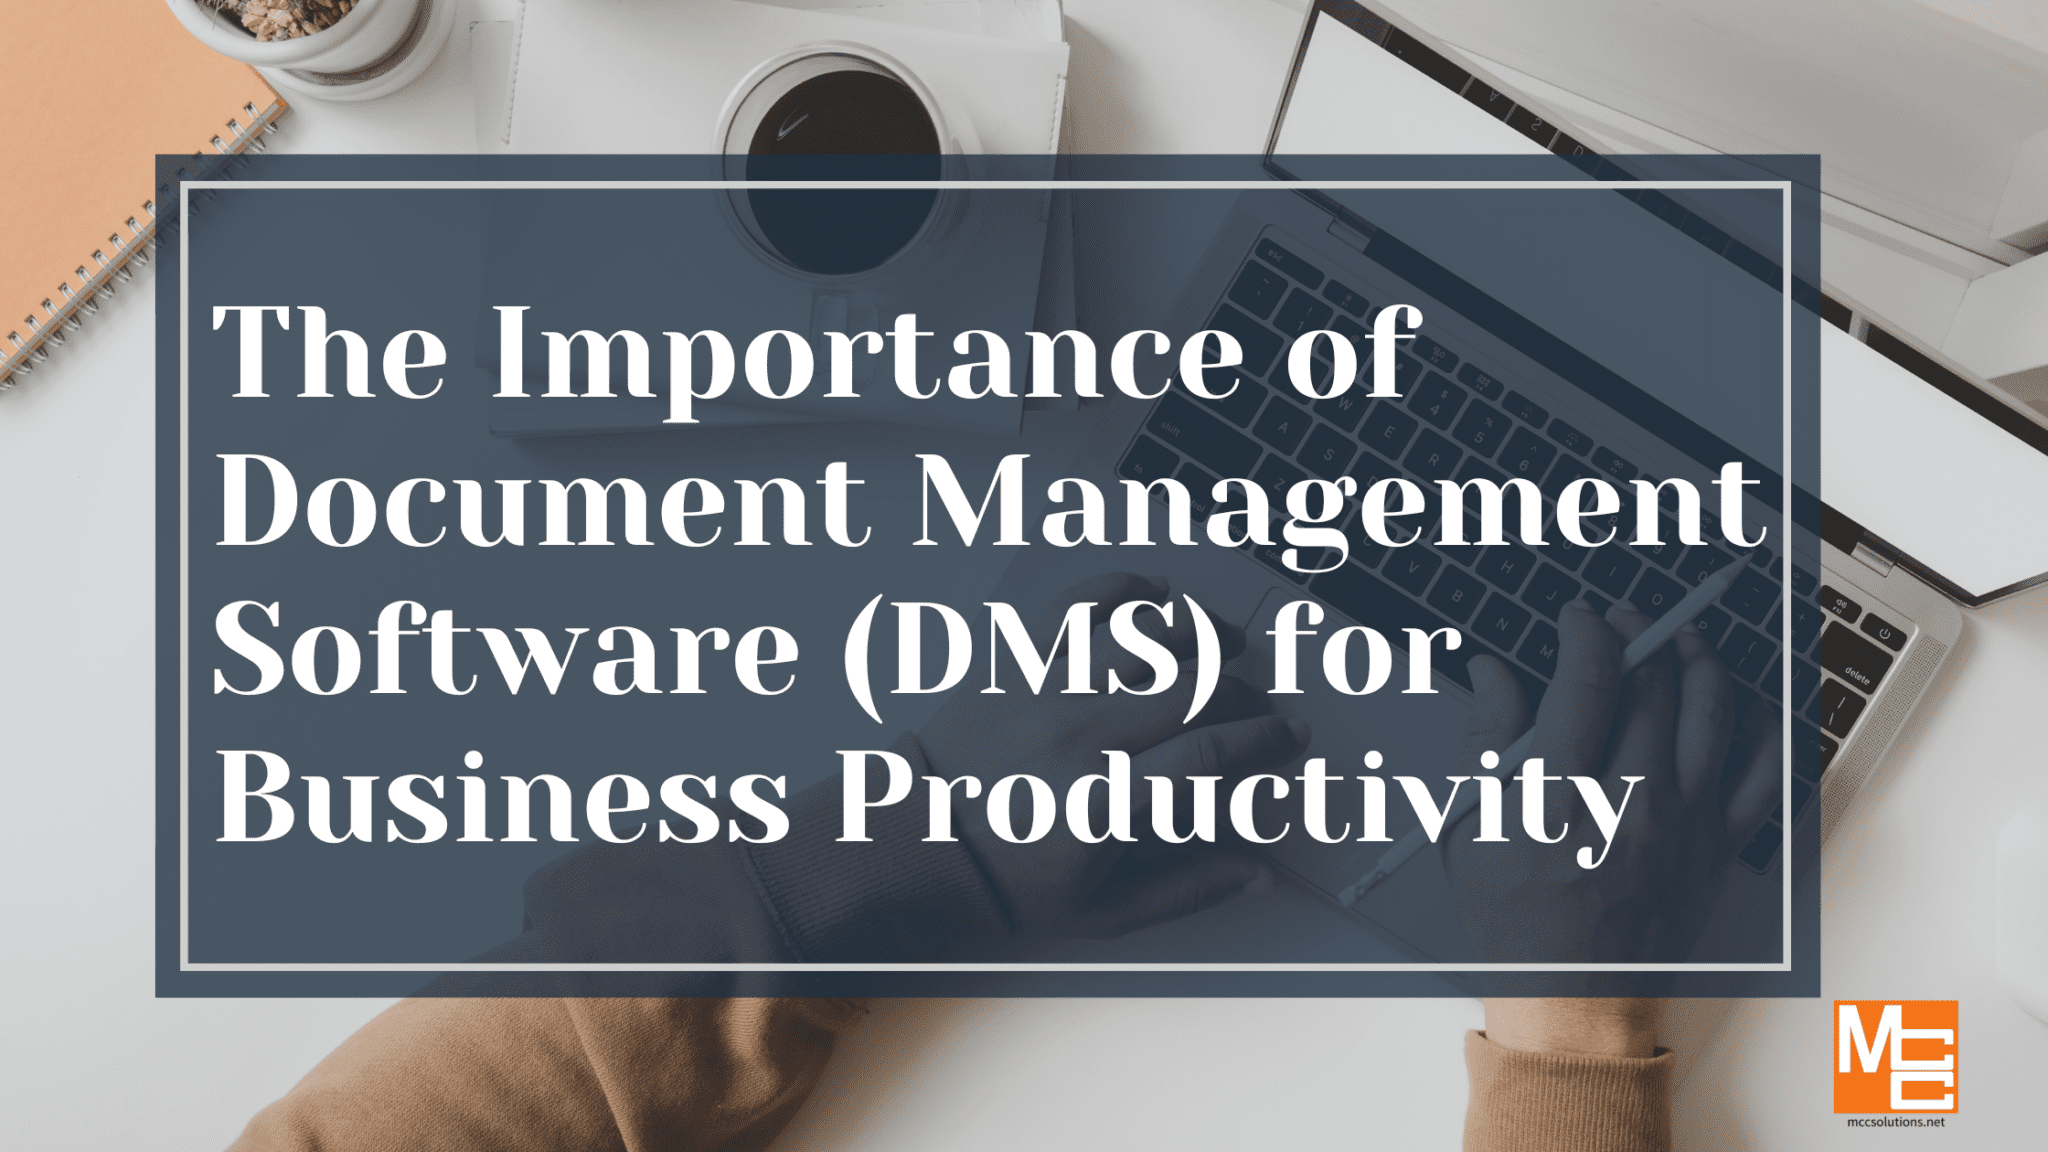 The Importance of Document Management Software (DMS) for Business Productivity